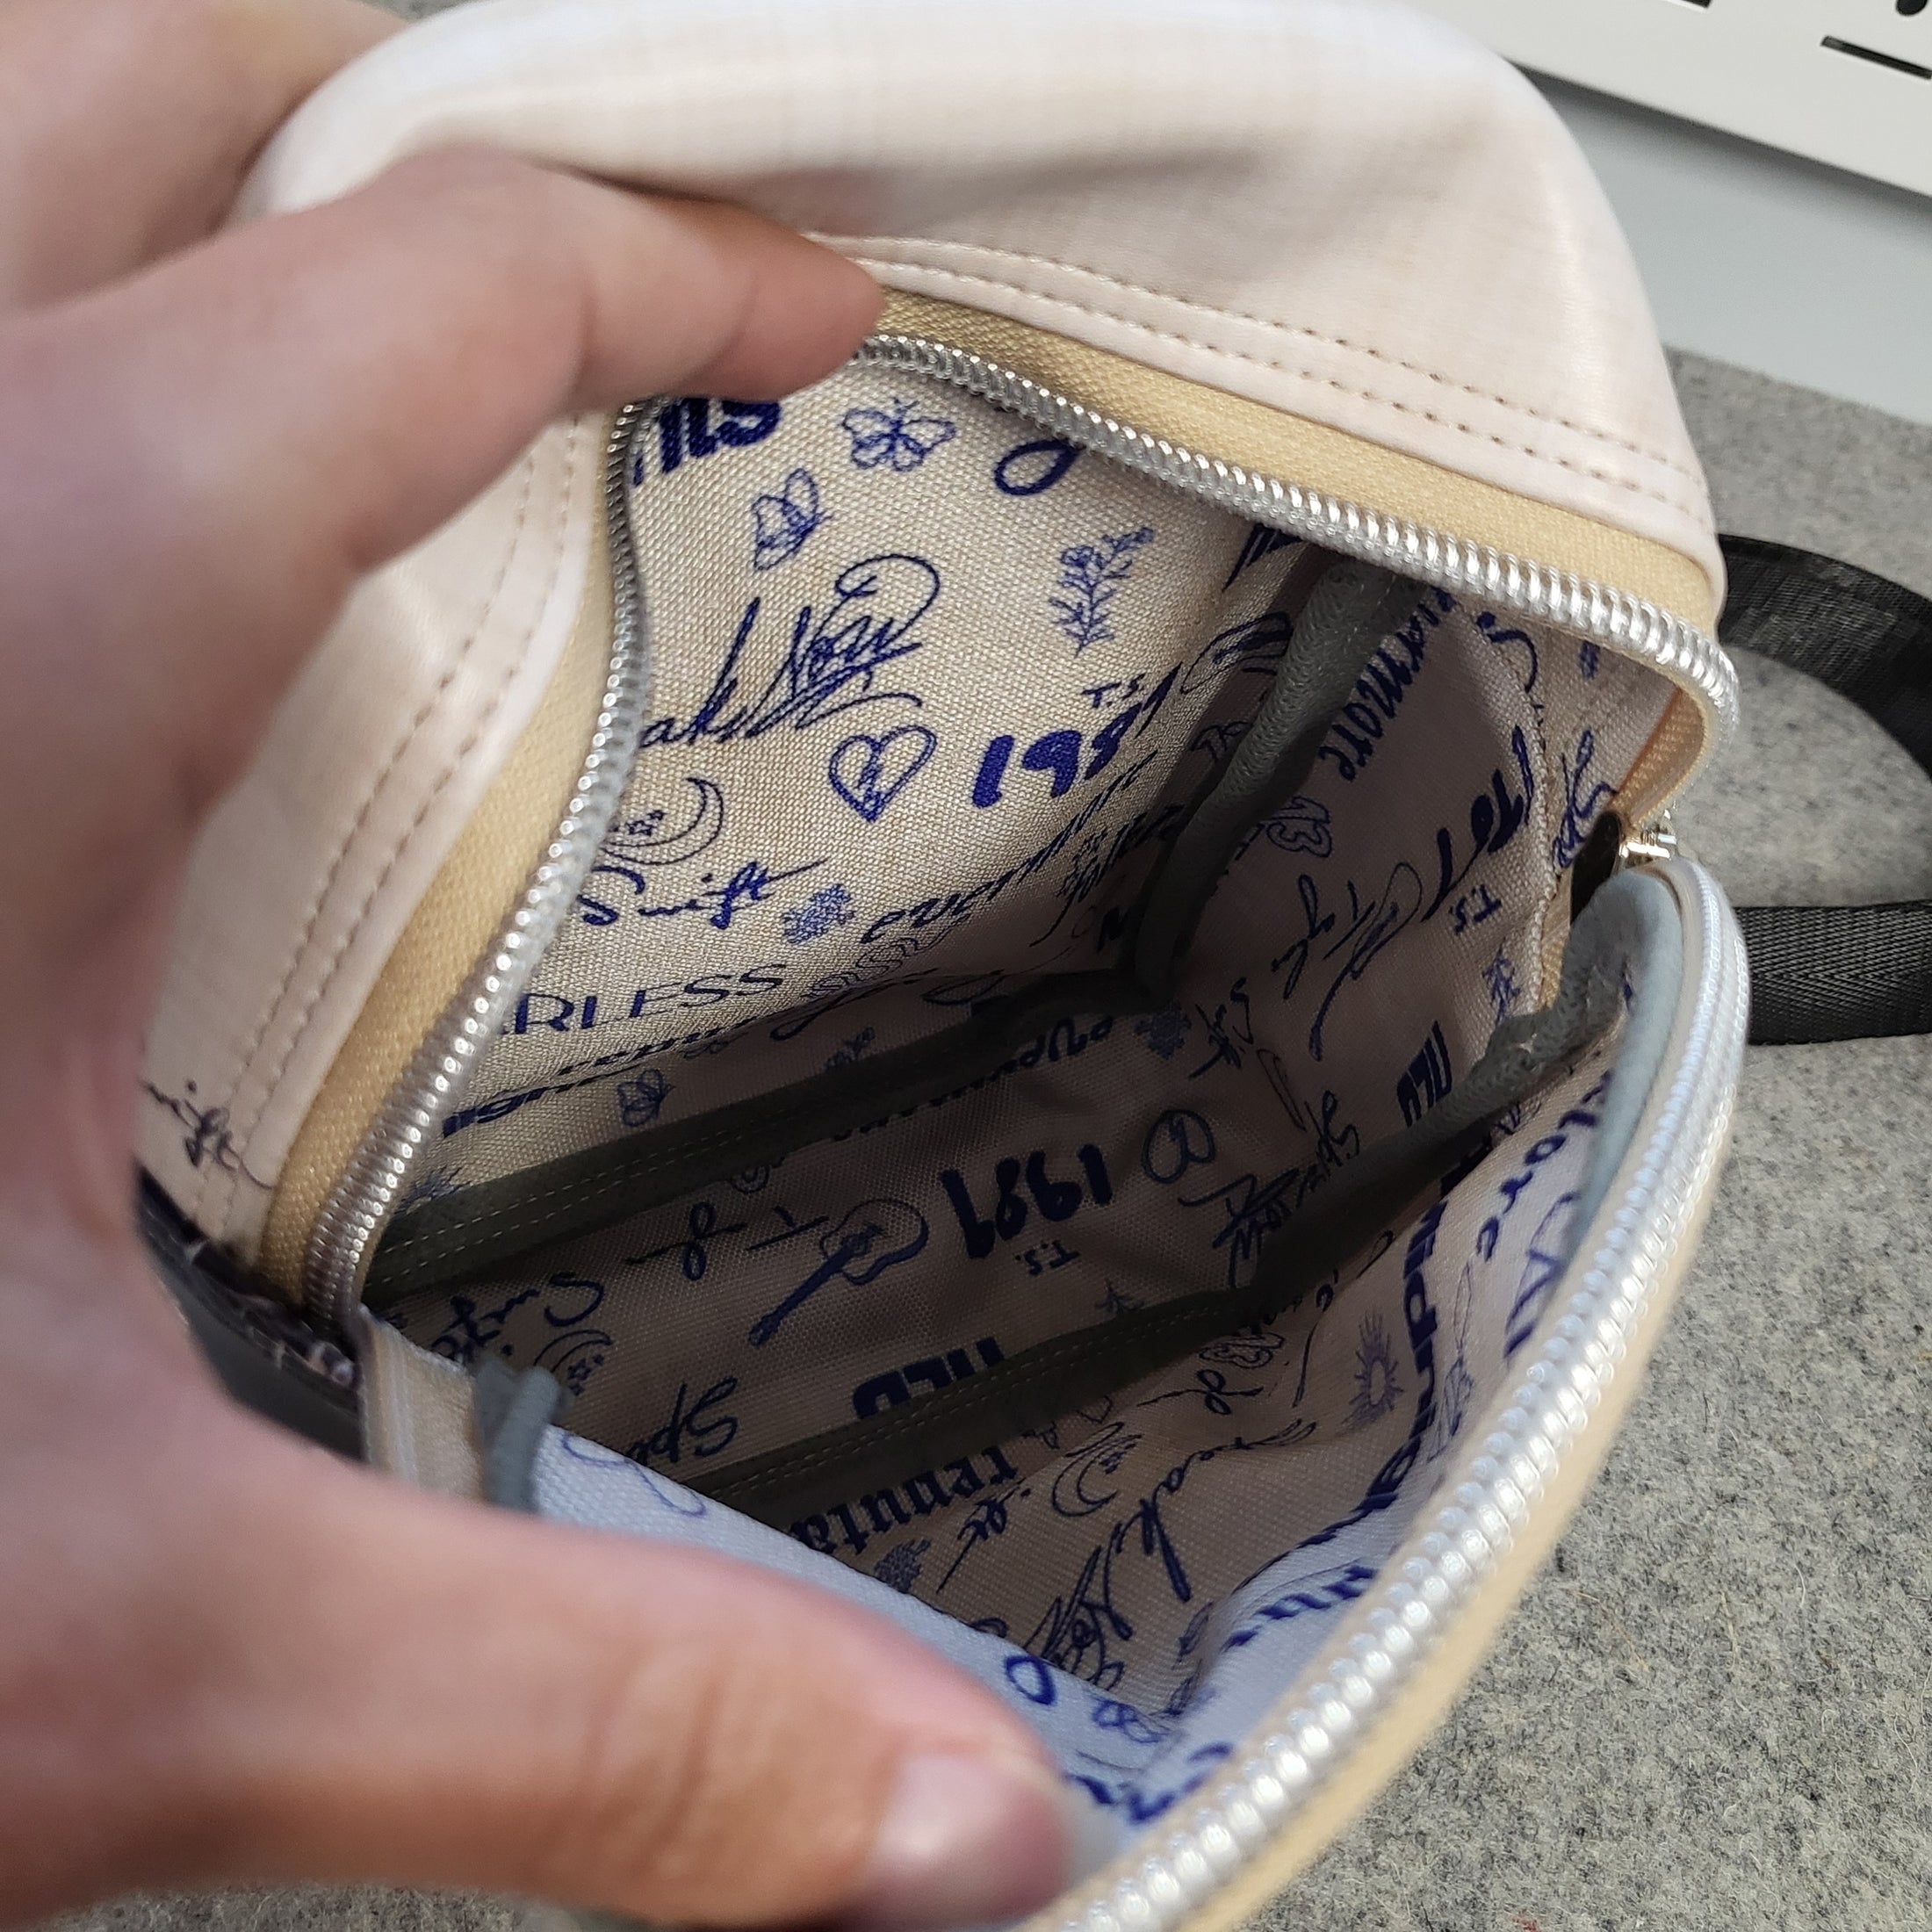 Main interior compartment of the Swiftie sling bag showing no raw edges and waterproof canvas lining.